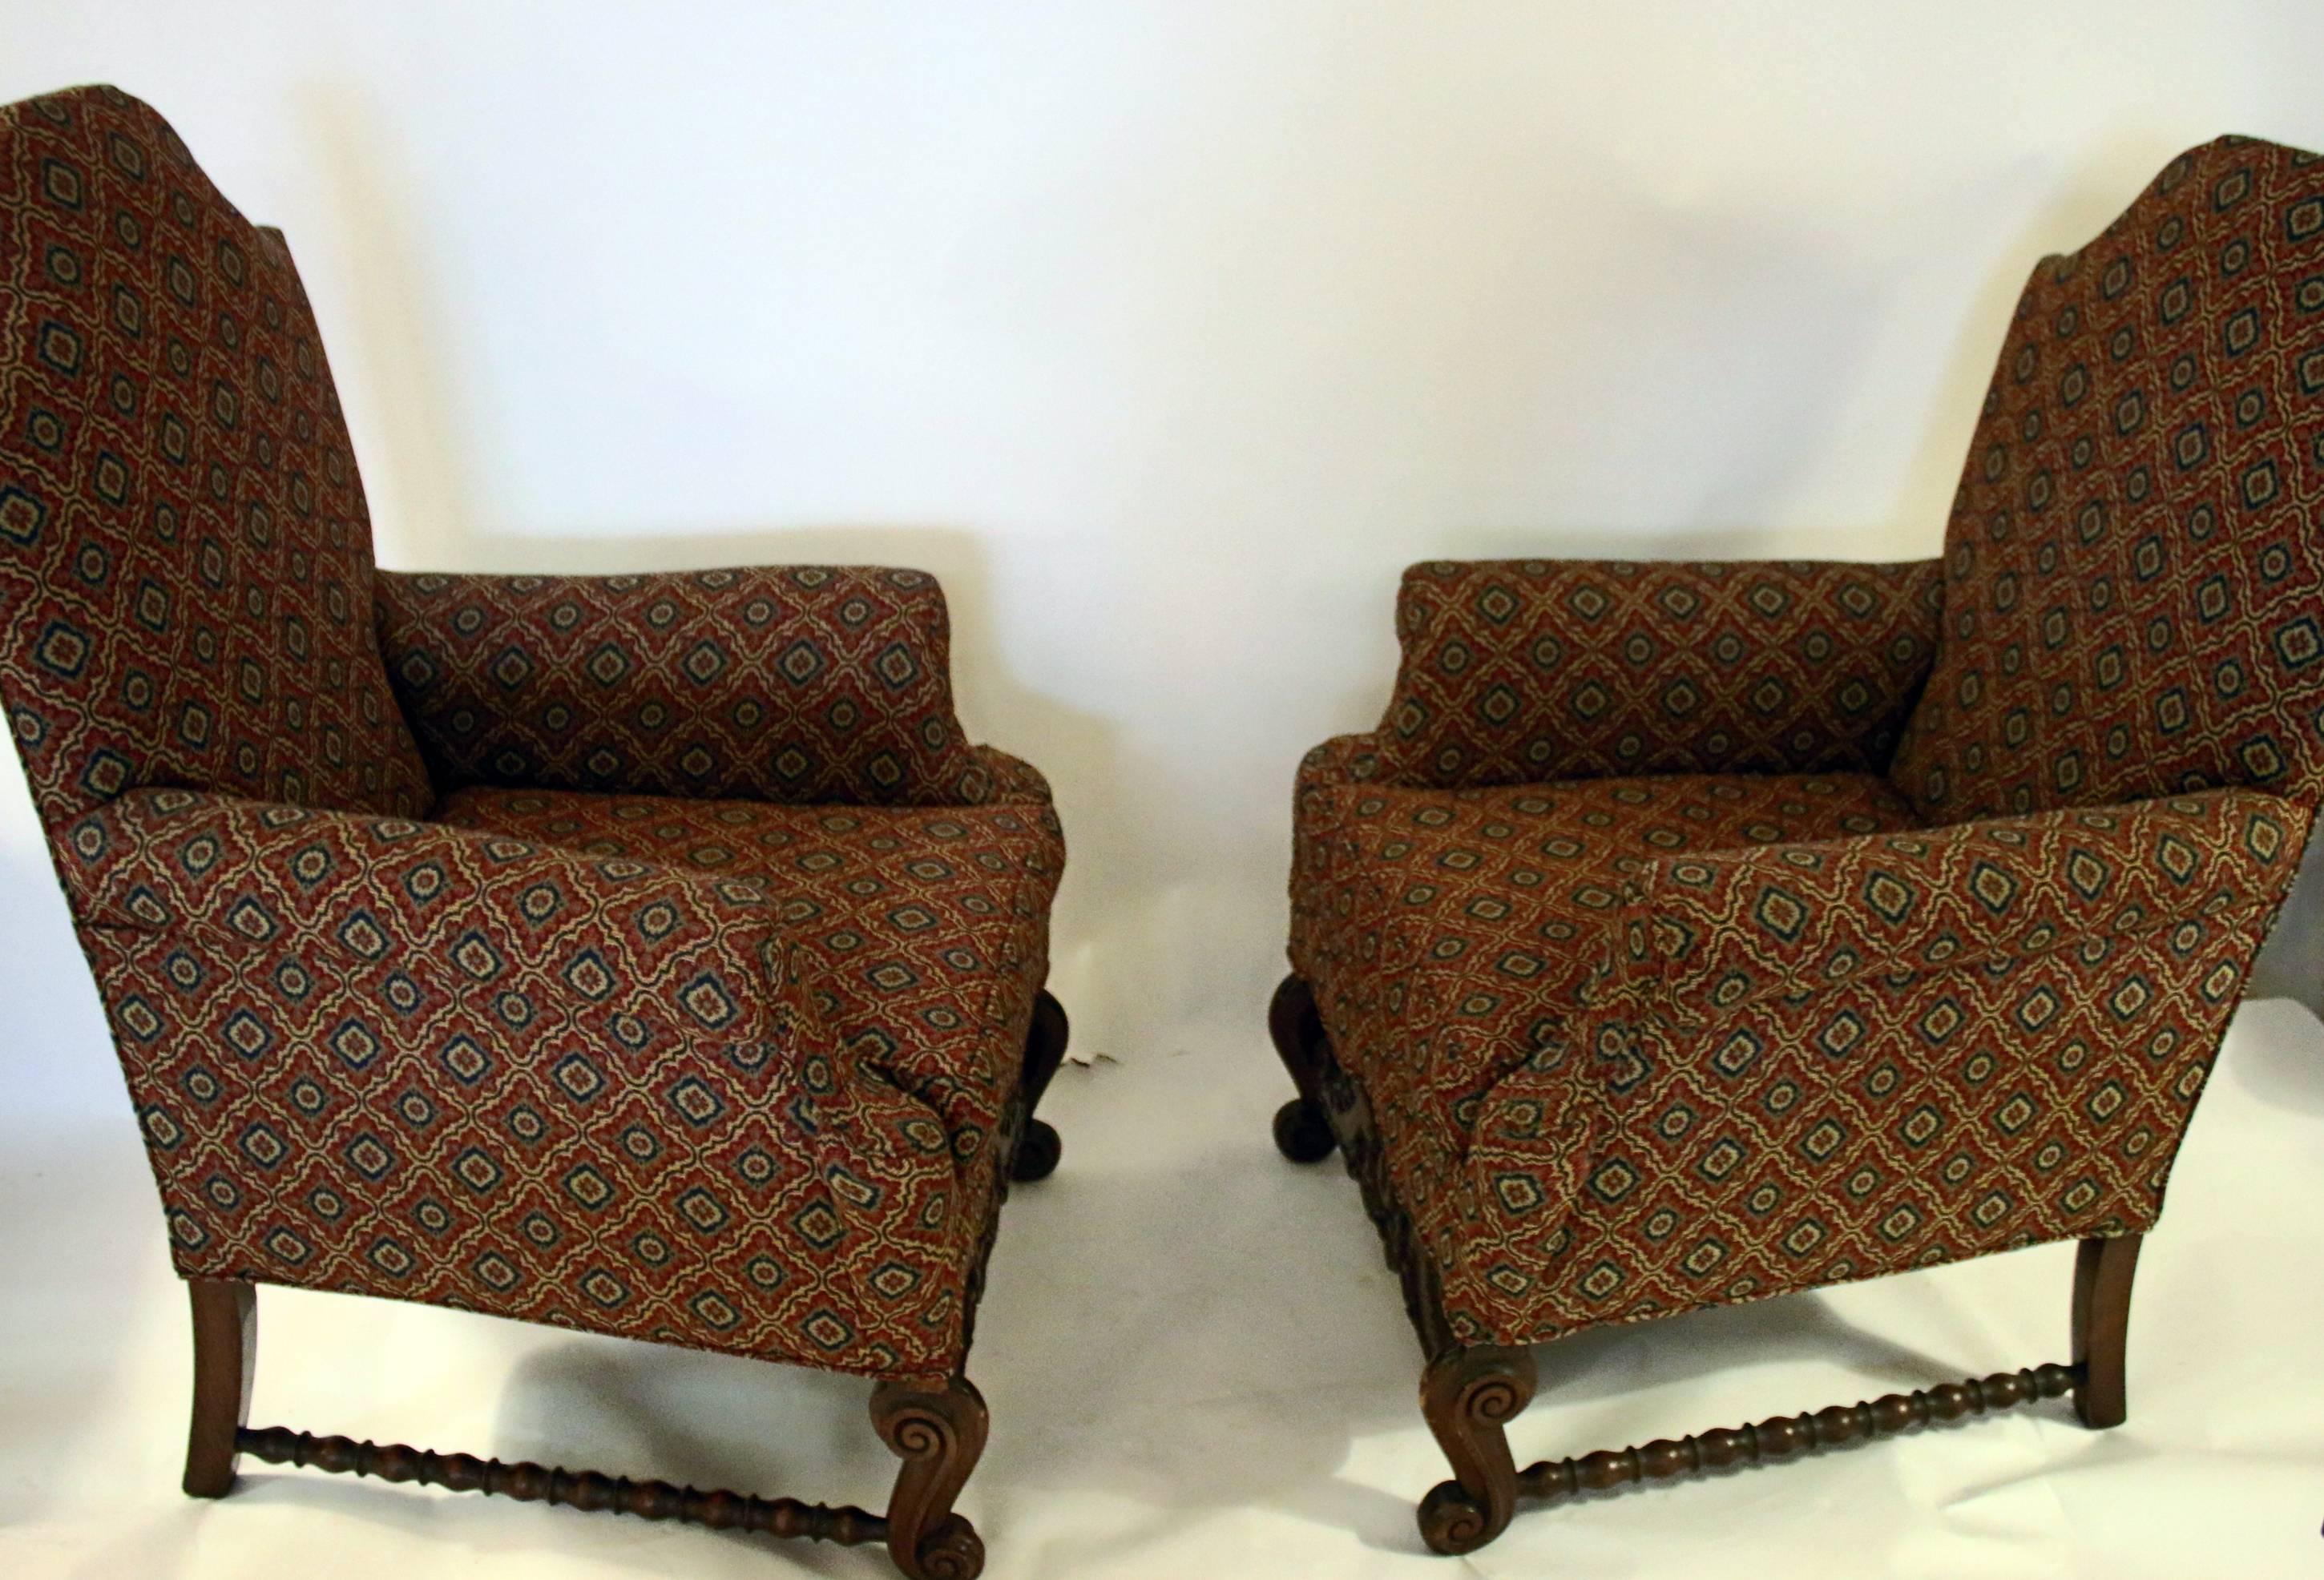 Late 19th Century 19th century Jacobean Revival Style Chair, Pair For Sale